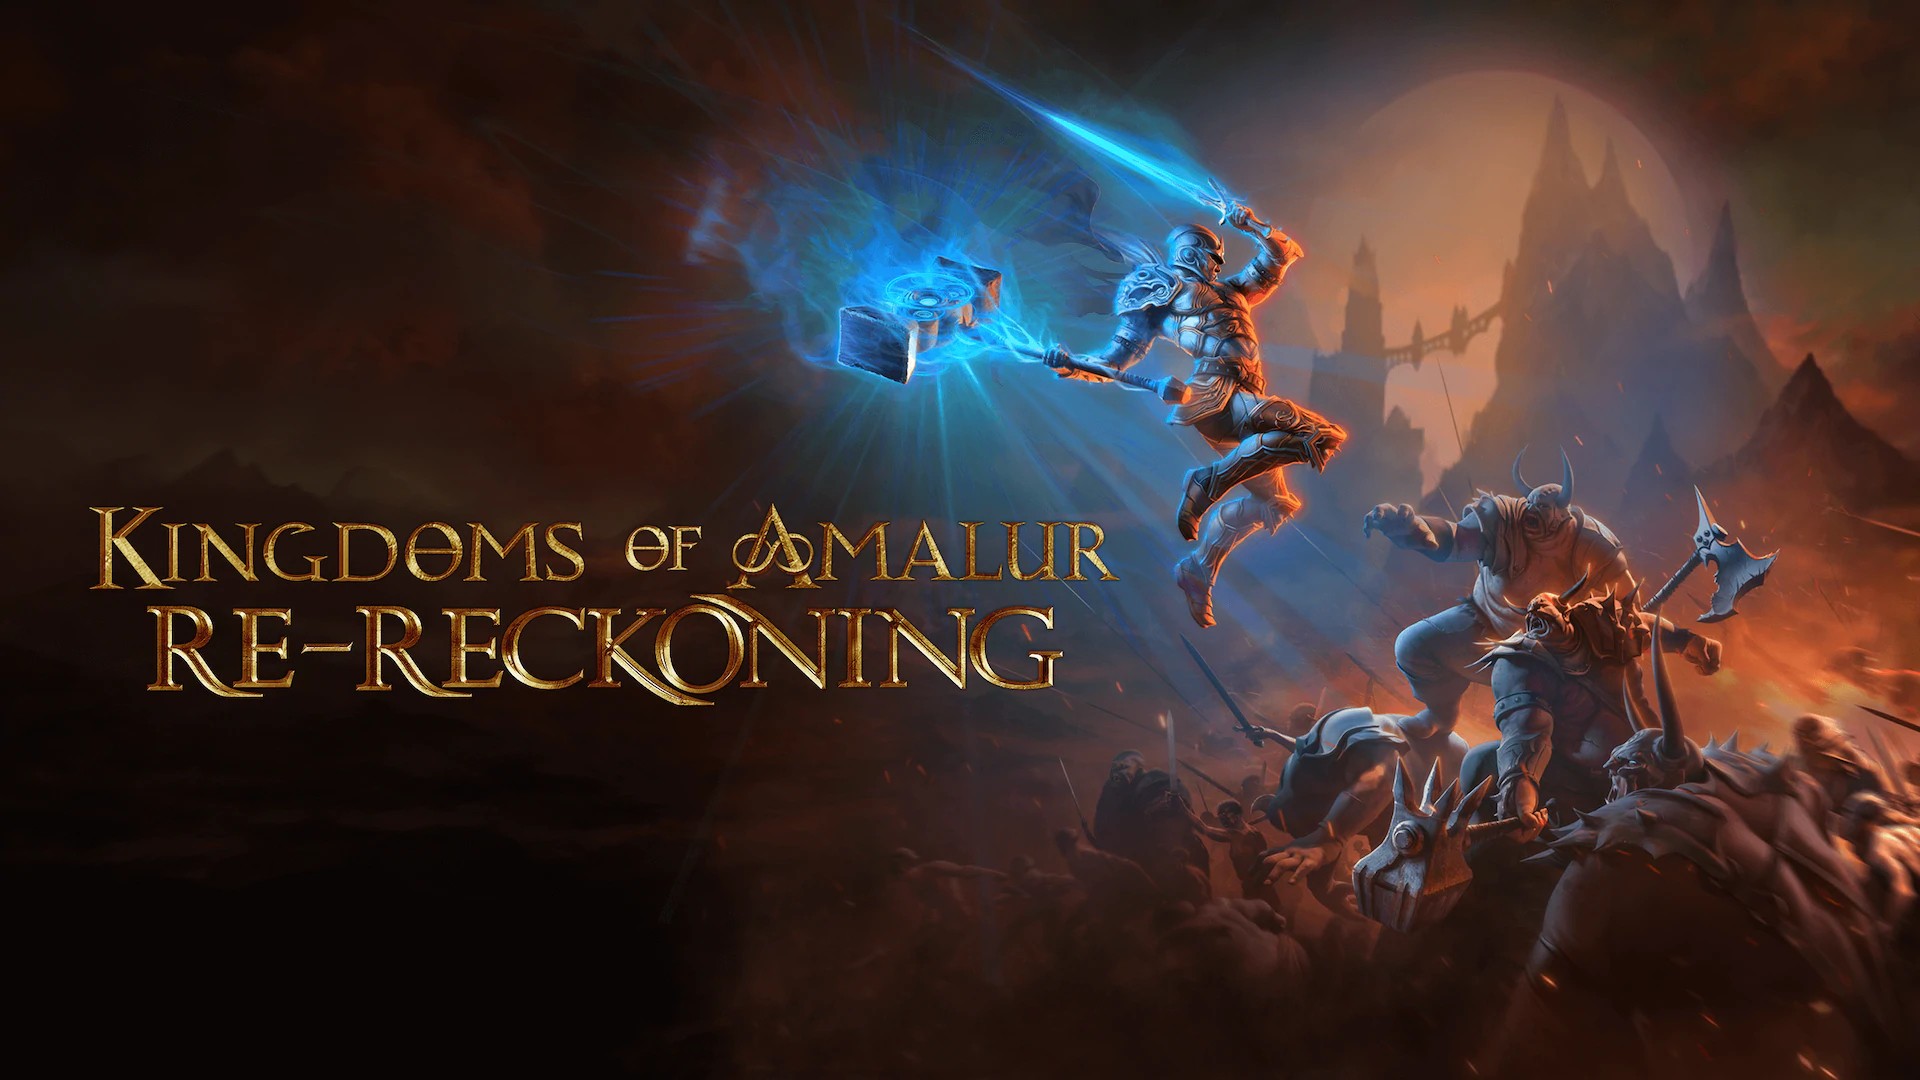 kingdoms-of-amalur-re-reckoning-review-ps4